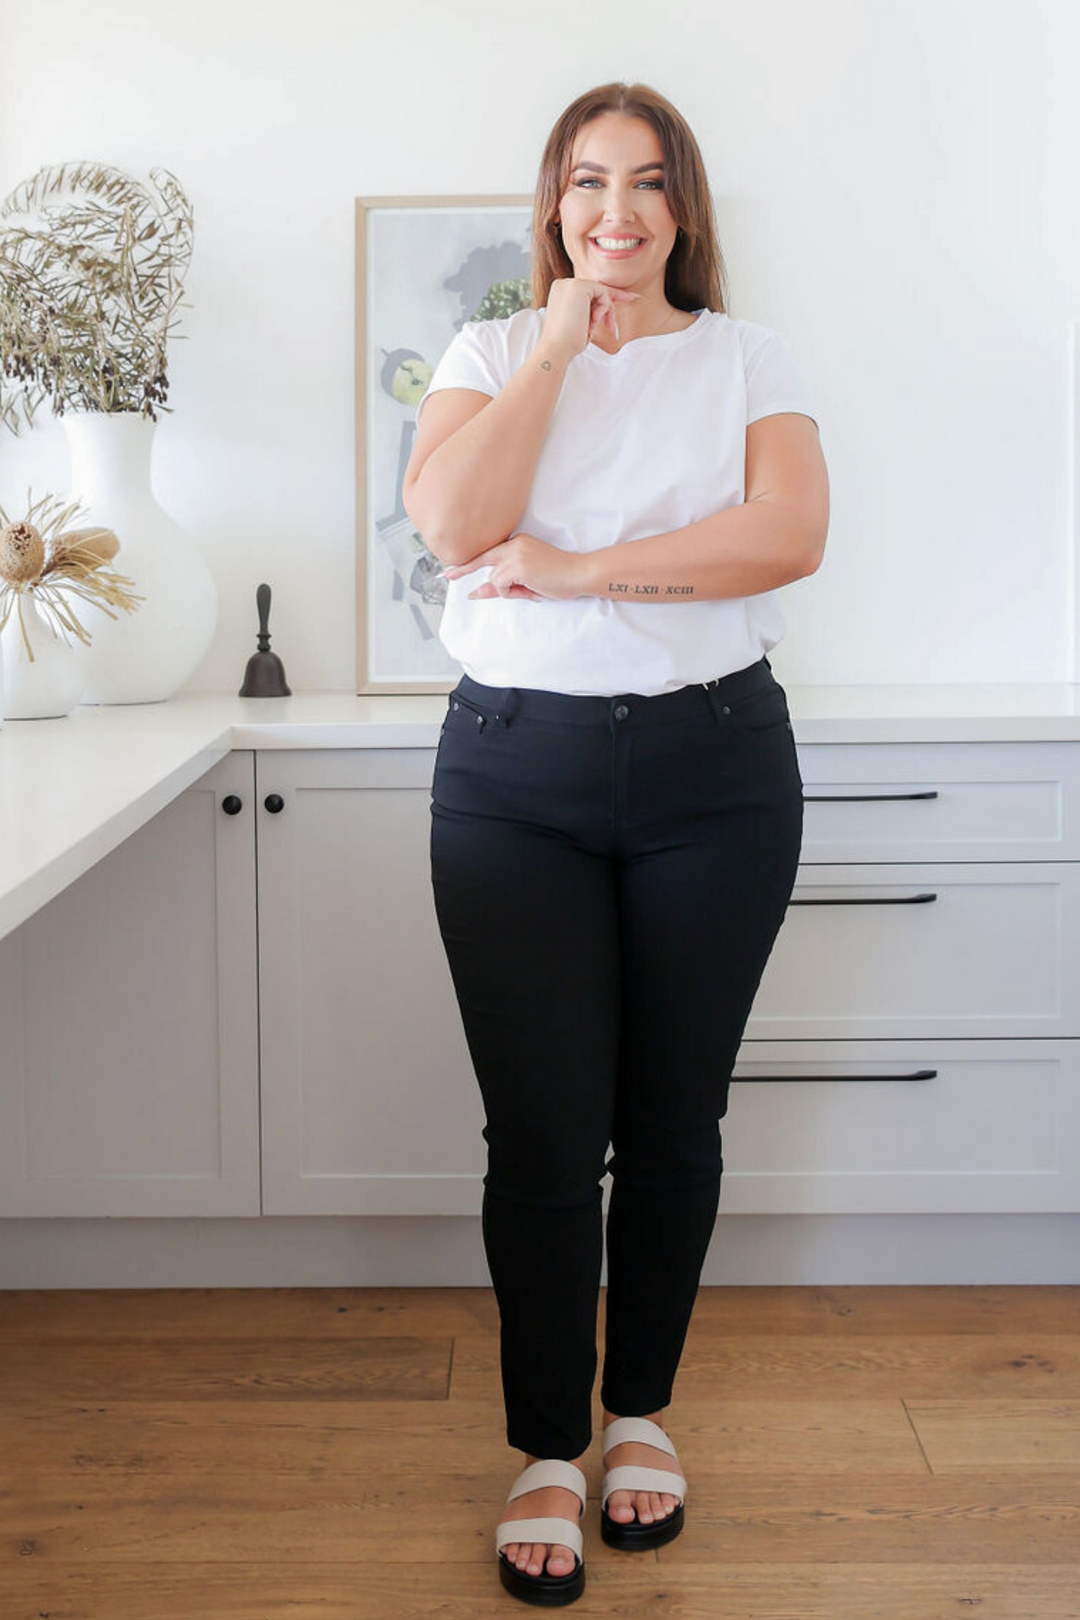 Ladies Black Jeans - Full Length Stretch Jeans - Functional Front + Back Pockets - Sizes 6 - 26 - Delta Jeans Black Front Full Length View Paired With Daisy White T-Shirt - Daisy's Closet